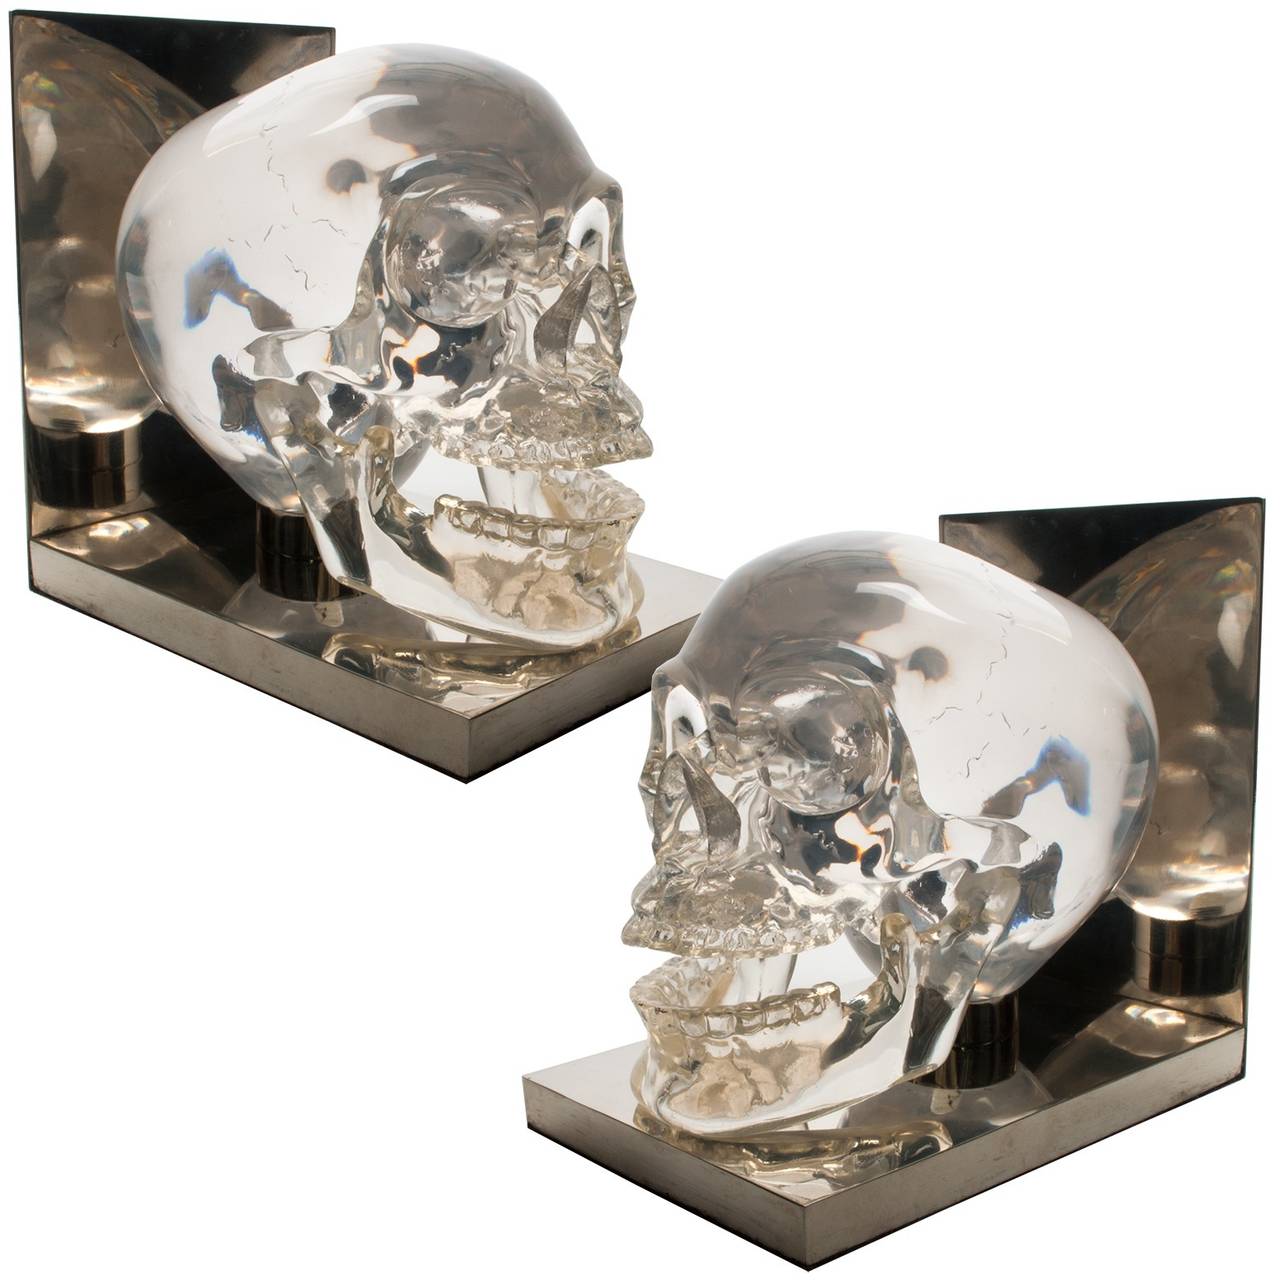 Skull bookends acrylic Lucite steel polished, France, 1970s. Solid cast resin mounted on nickel-plated metal platforms. The skulls are finely detailed and have hinged jaws. Made in France and sold at Harrods in London during the 1970s.